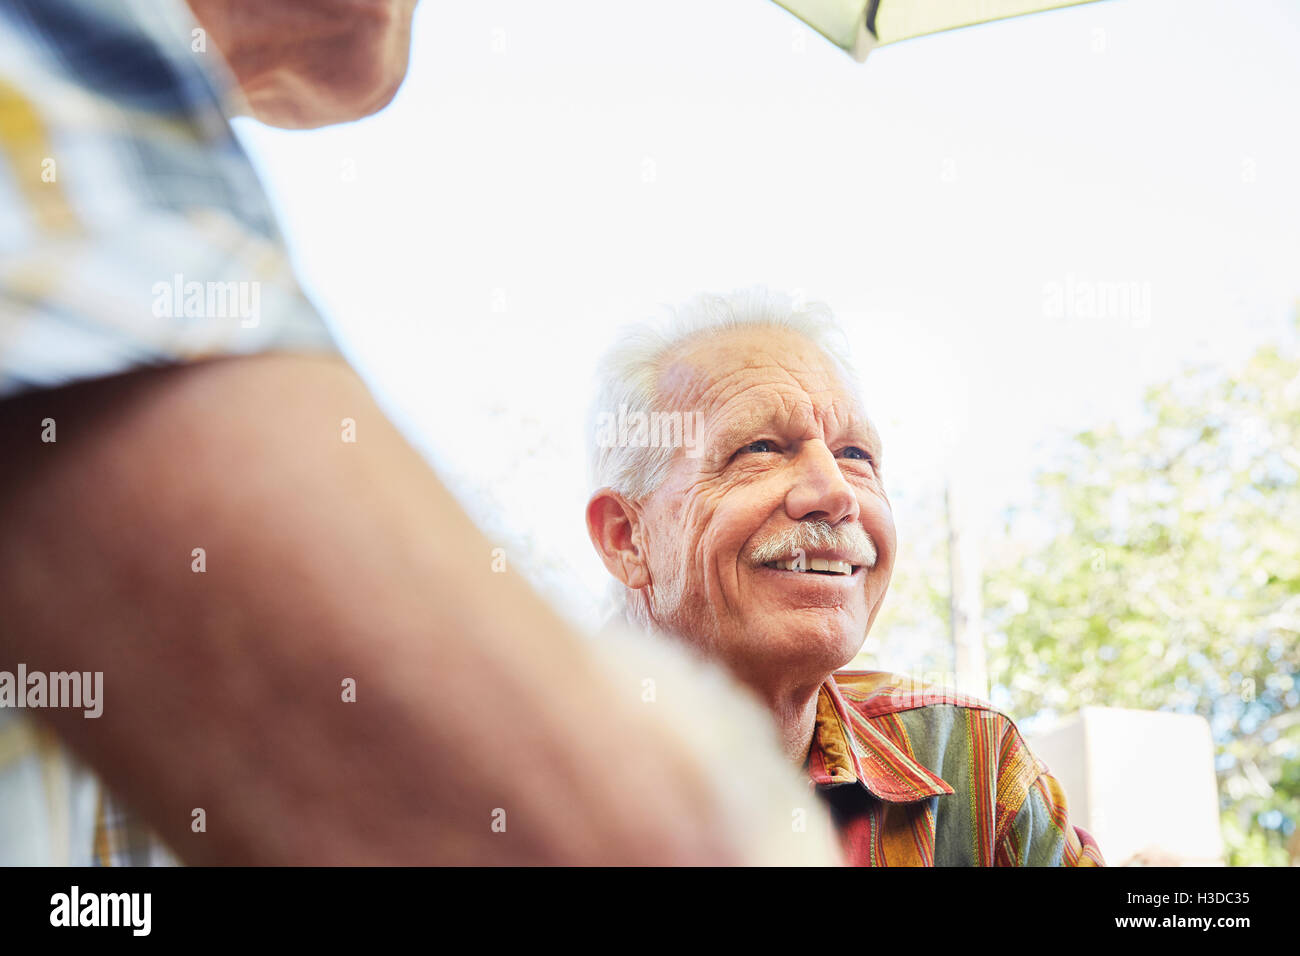 Smiling senior man with moustache sitting outdoor in company. Stock Photo